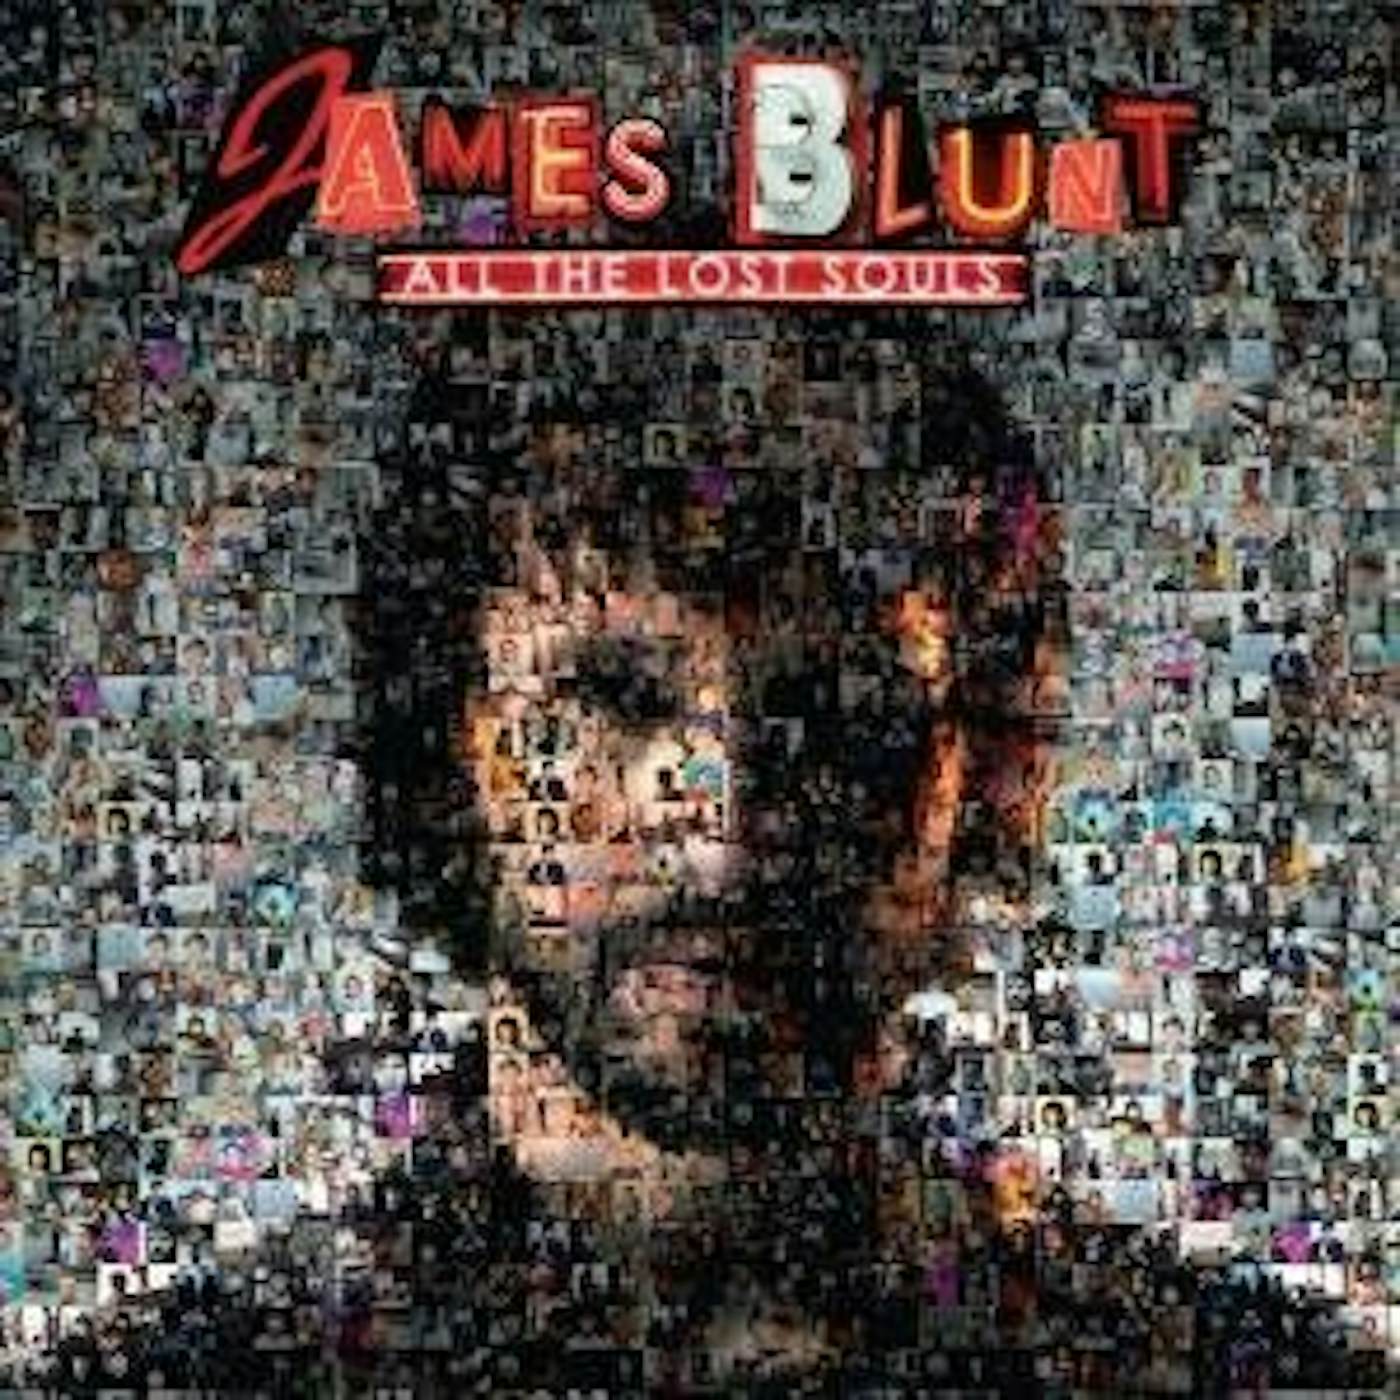 James Blunt ALL THE LOST SOULS CD